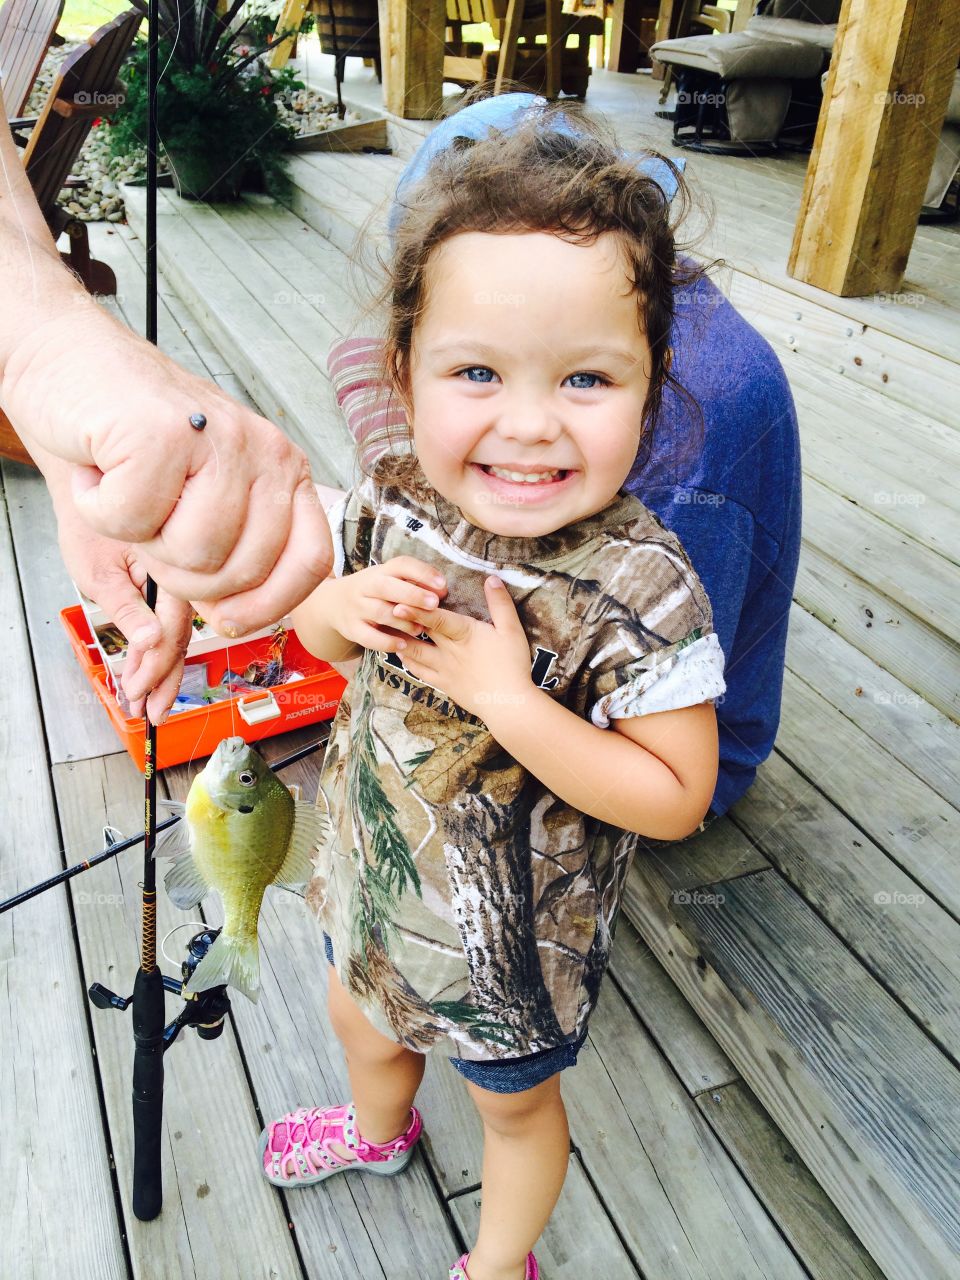 First time fishing